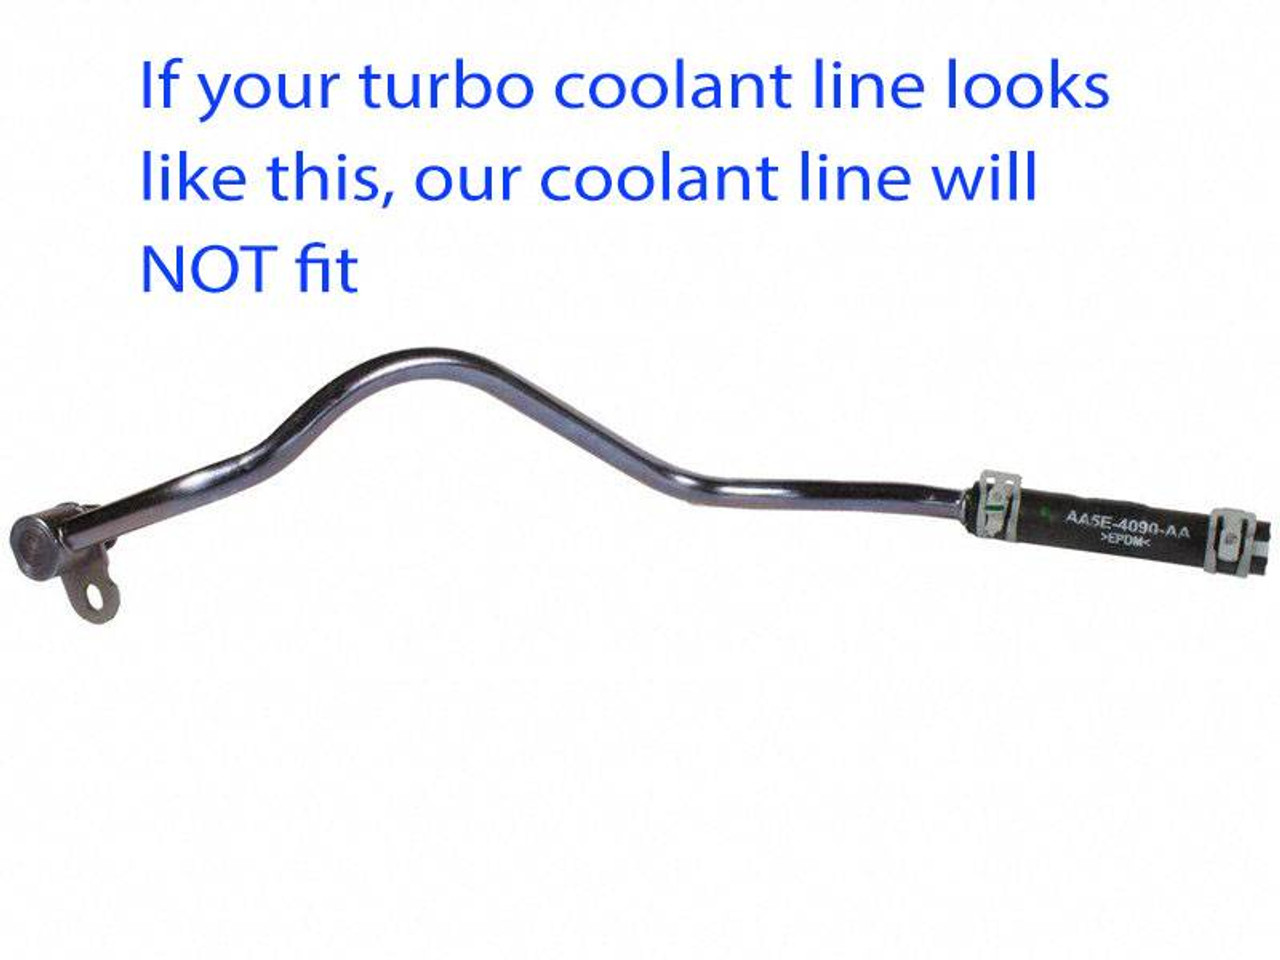 Sinister Diesel Turbo Coolant Feed Line for 2011-2016 Ford Powerstroke 6.7L - SD-TURB-COOL-6.7P